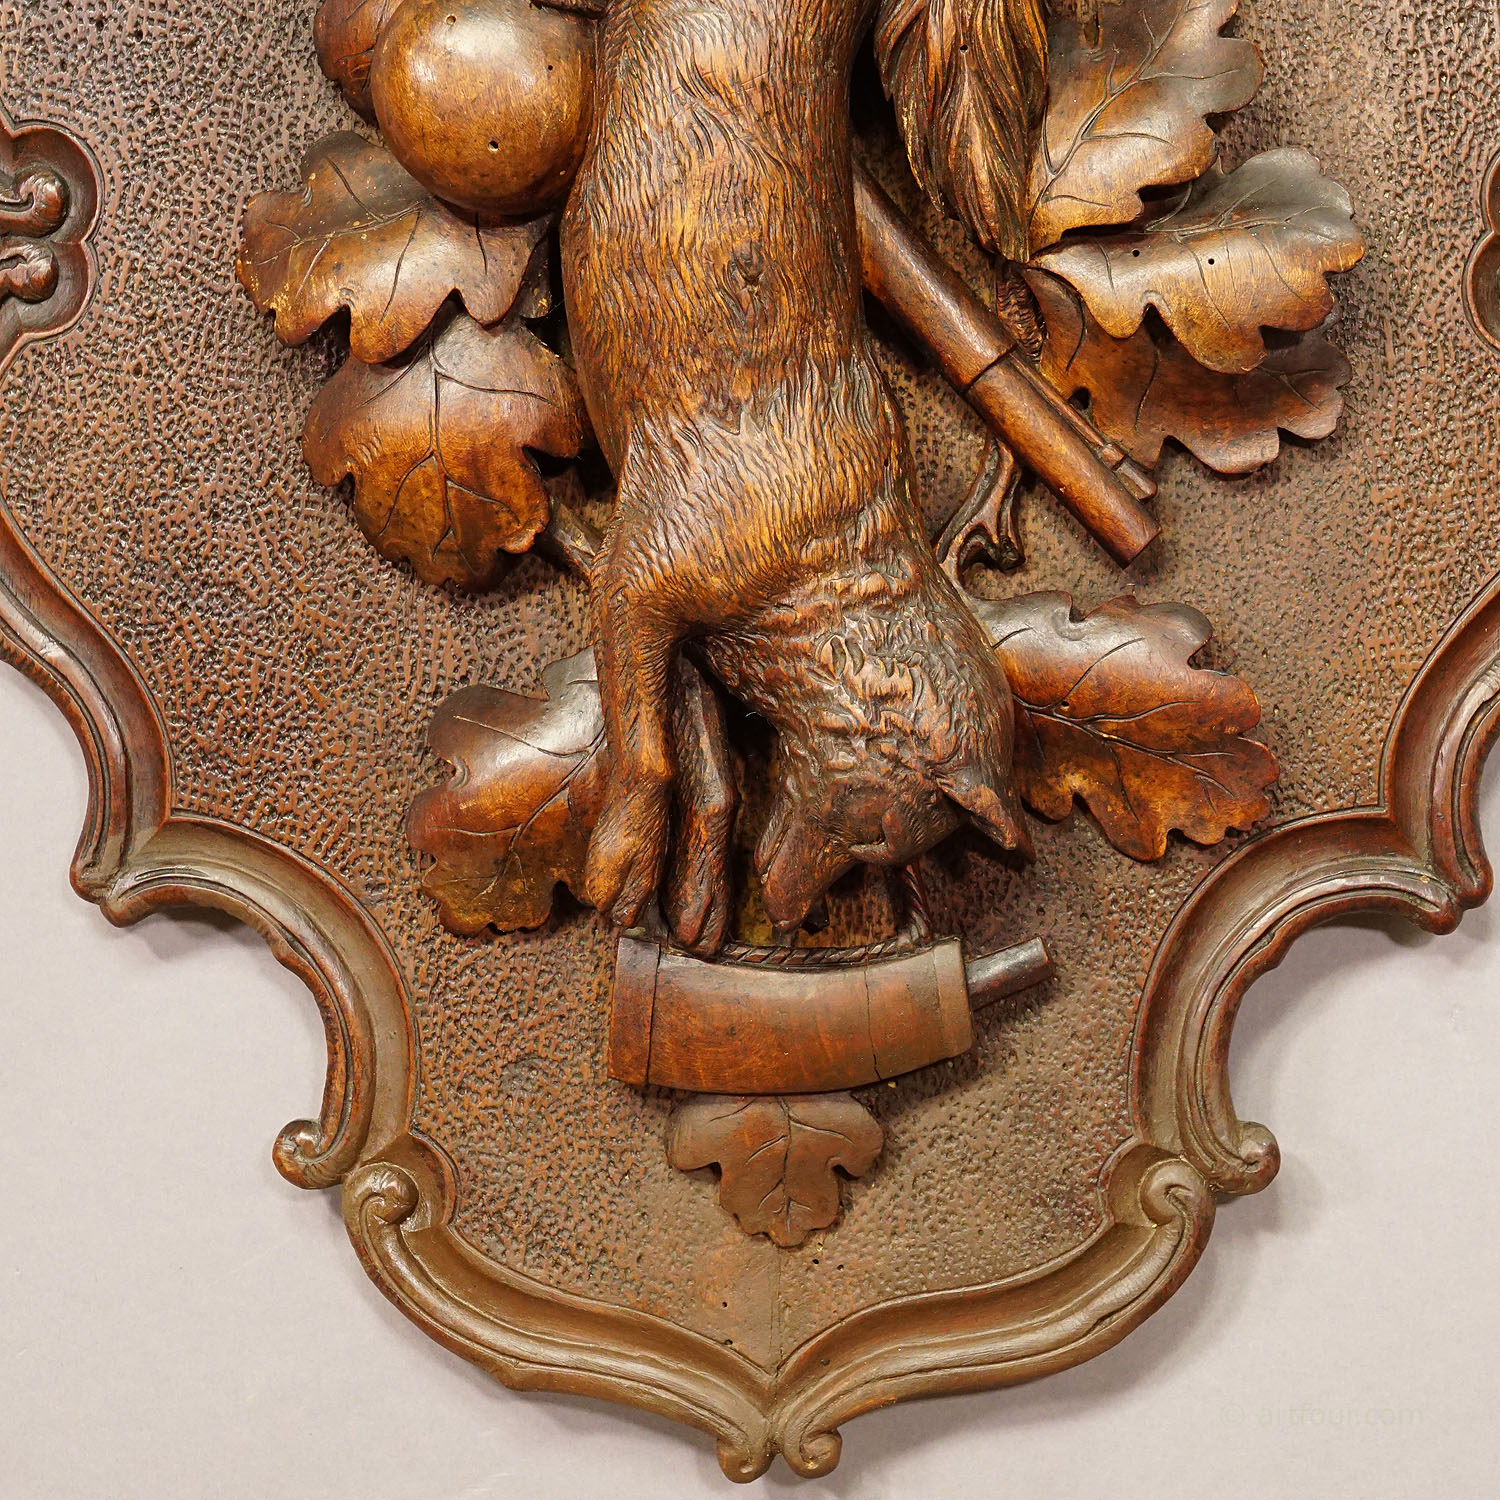 Antique Wooden Carved Black Forest Game Plaque with Fox